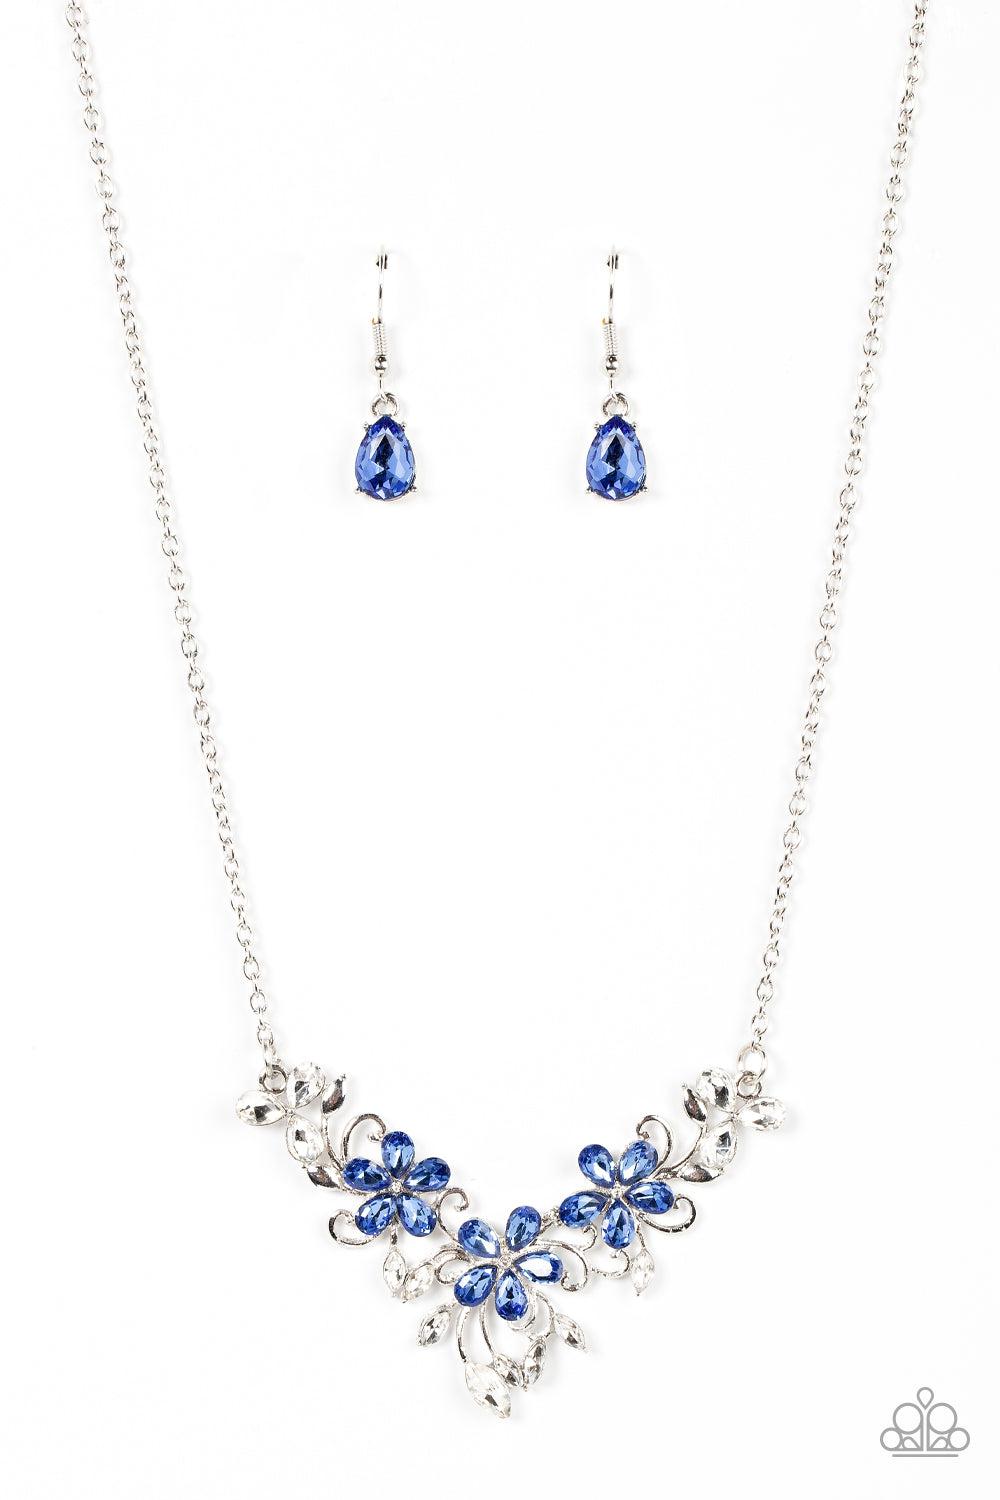 Floral Fashion Show Blue Rhinestone Flower Necklace - Paparazzi Accessories- lightbox - CarasShop.com - $5 Jewelry by Cara Jewels